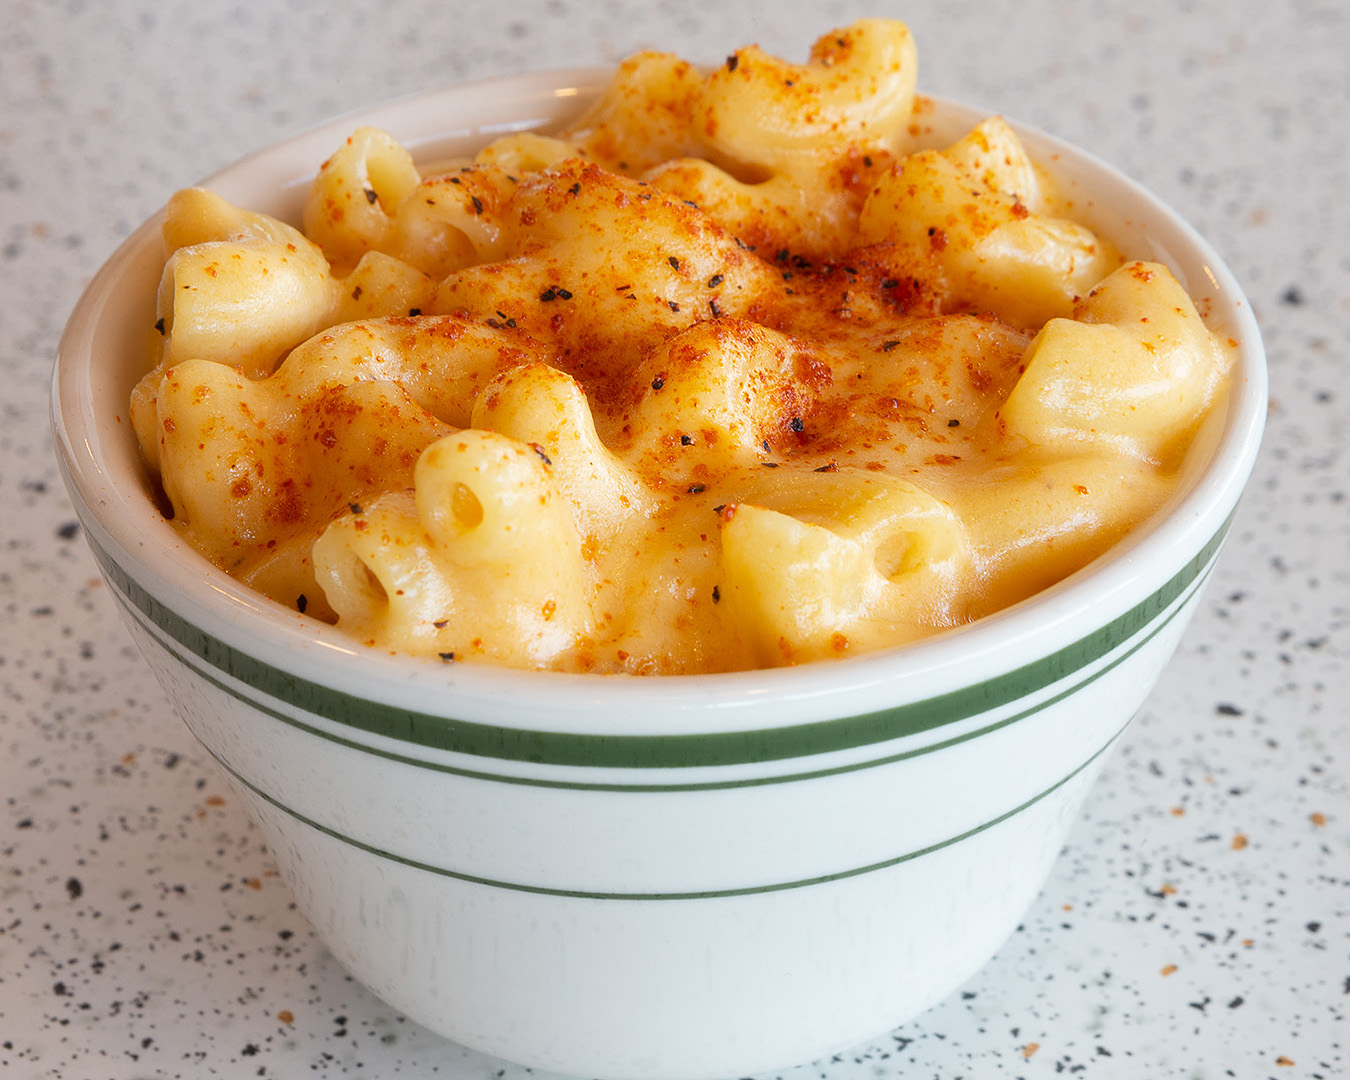 Amazing looking mac 'n' cheese from Peach's Hot Chicken.